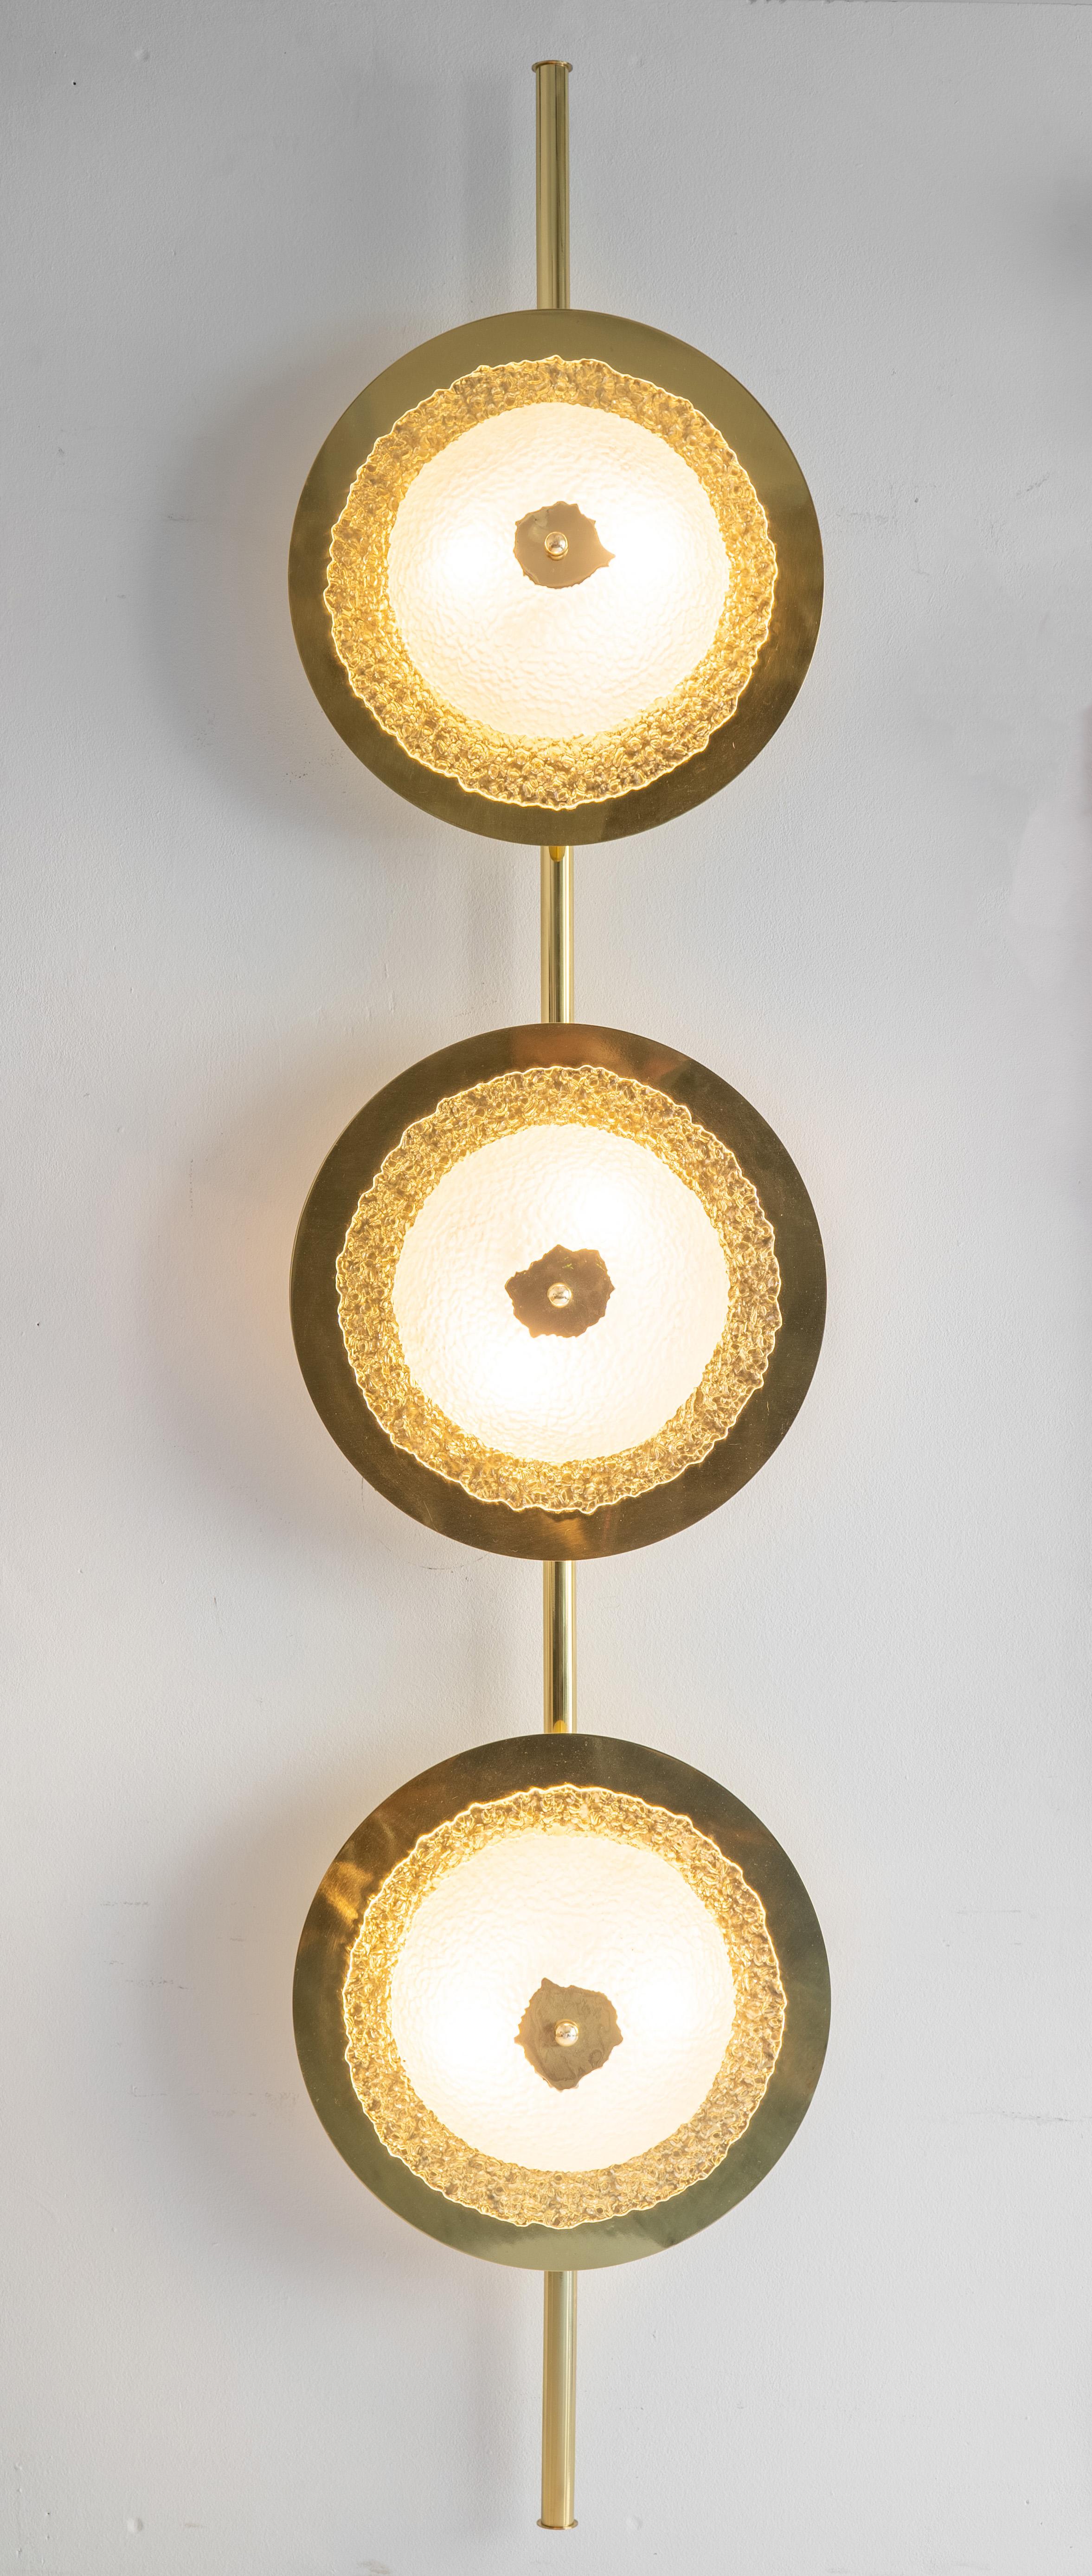 Huge wall lamp 100% italian craftmanship, The lamp has beautiful textured, ribbed and scalloped glass with polished brass with brutalist elements.